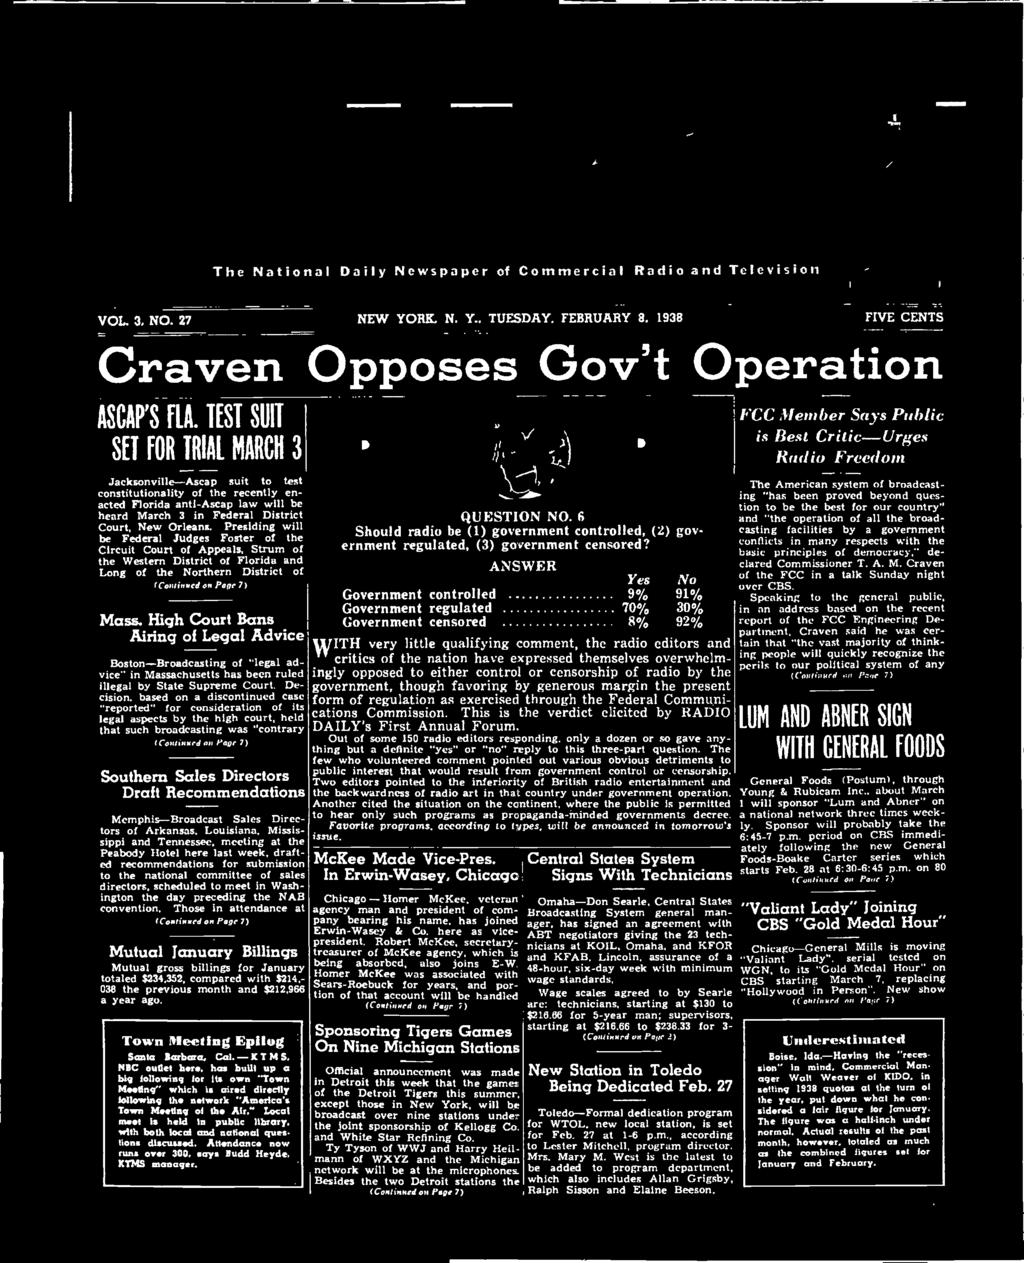 "t The National Daily Newspaper of Commercial Radio and Television VOL. 3, NO. 27 NEW YORK, N. Y.. TUESDAY. FEBRUARY 8, 1938 FIVE CENTS Craven Opposes Gov't Operation ASCAP'S FLA.